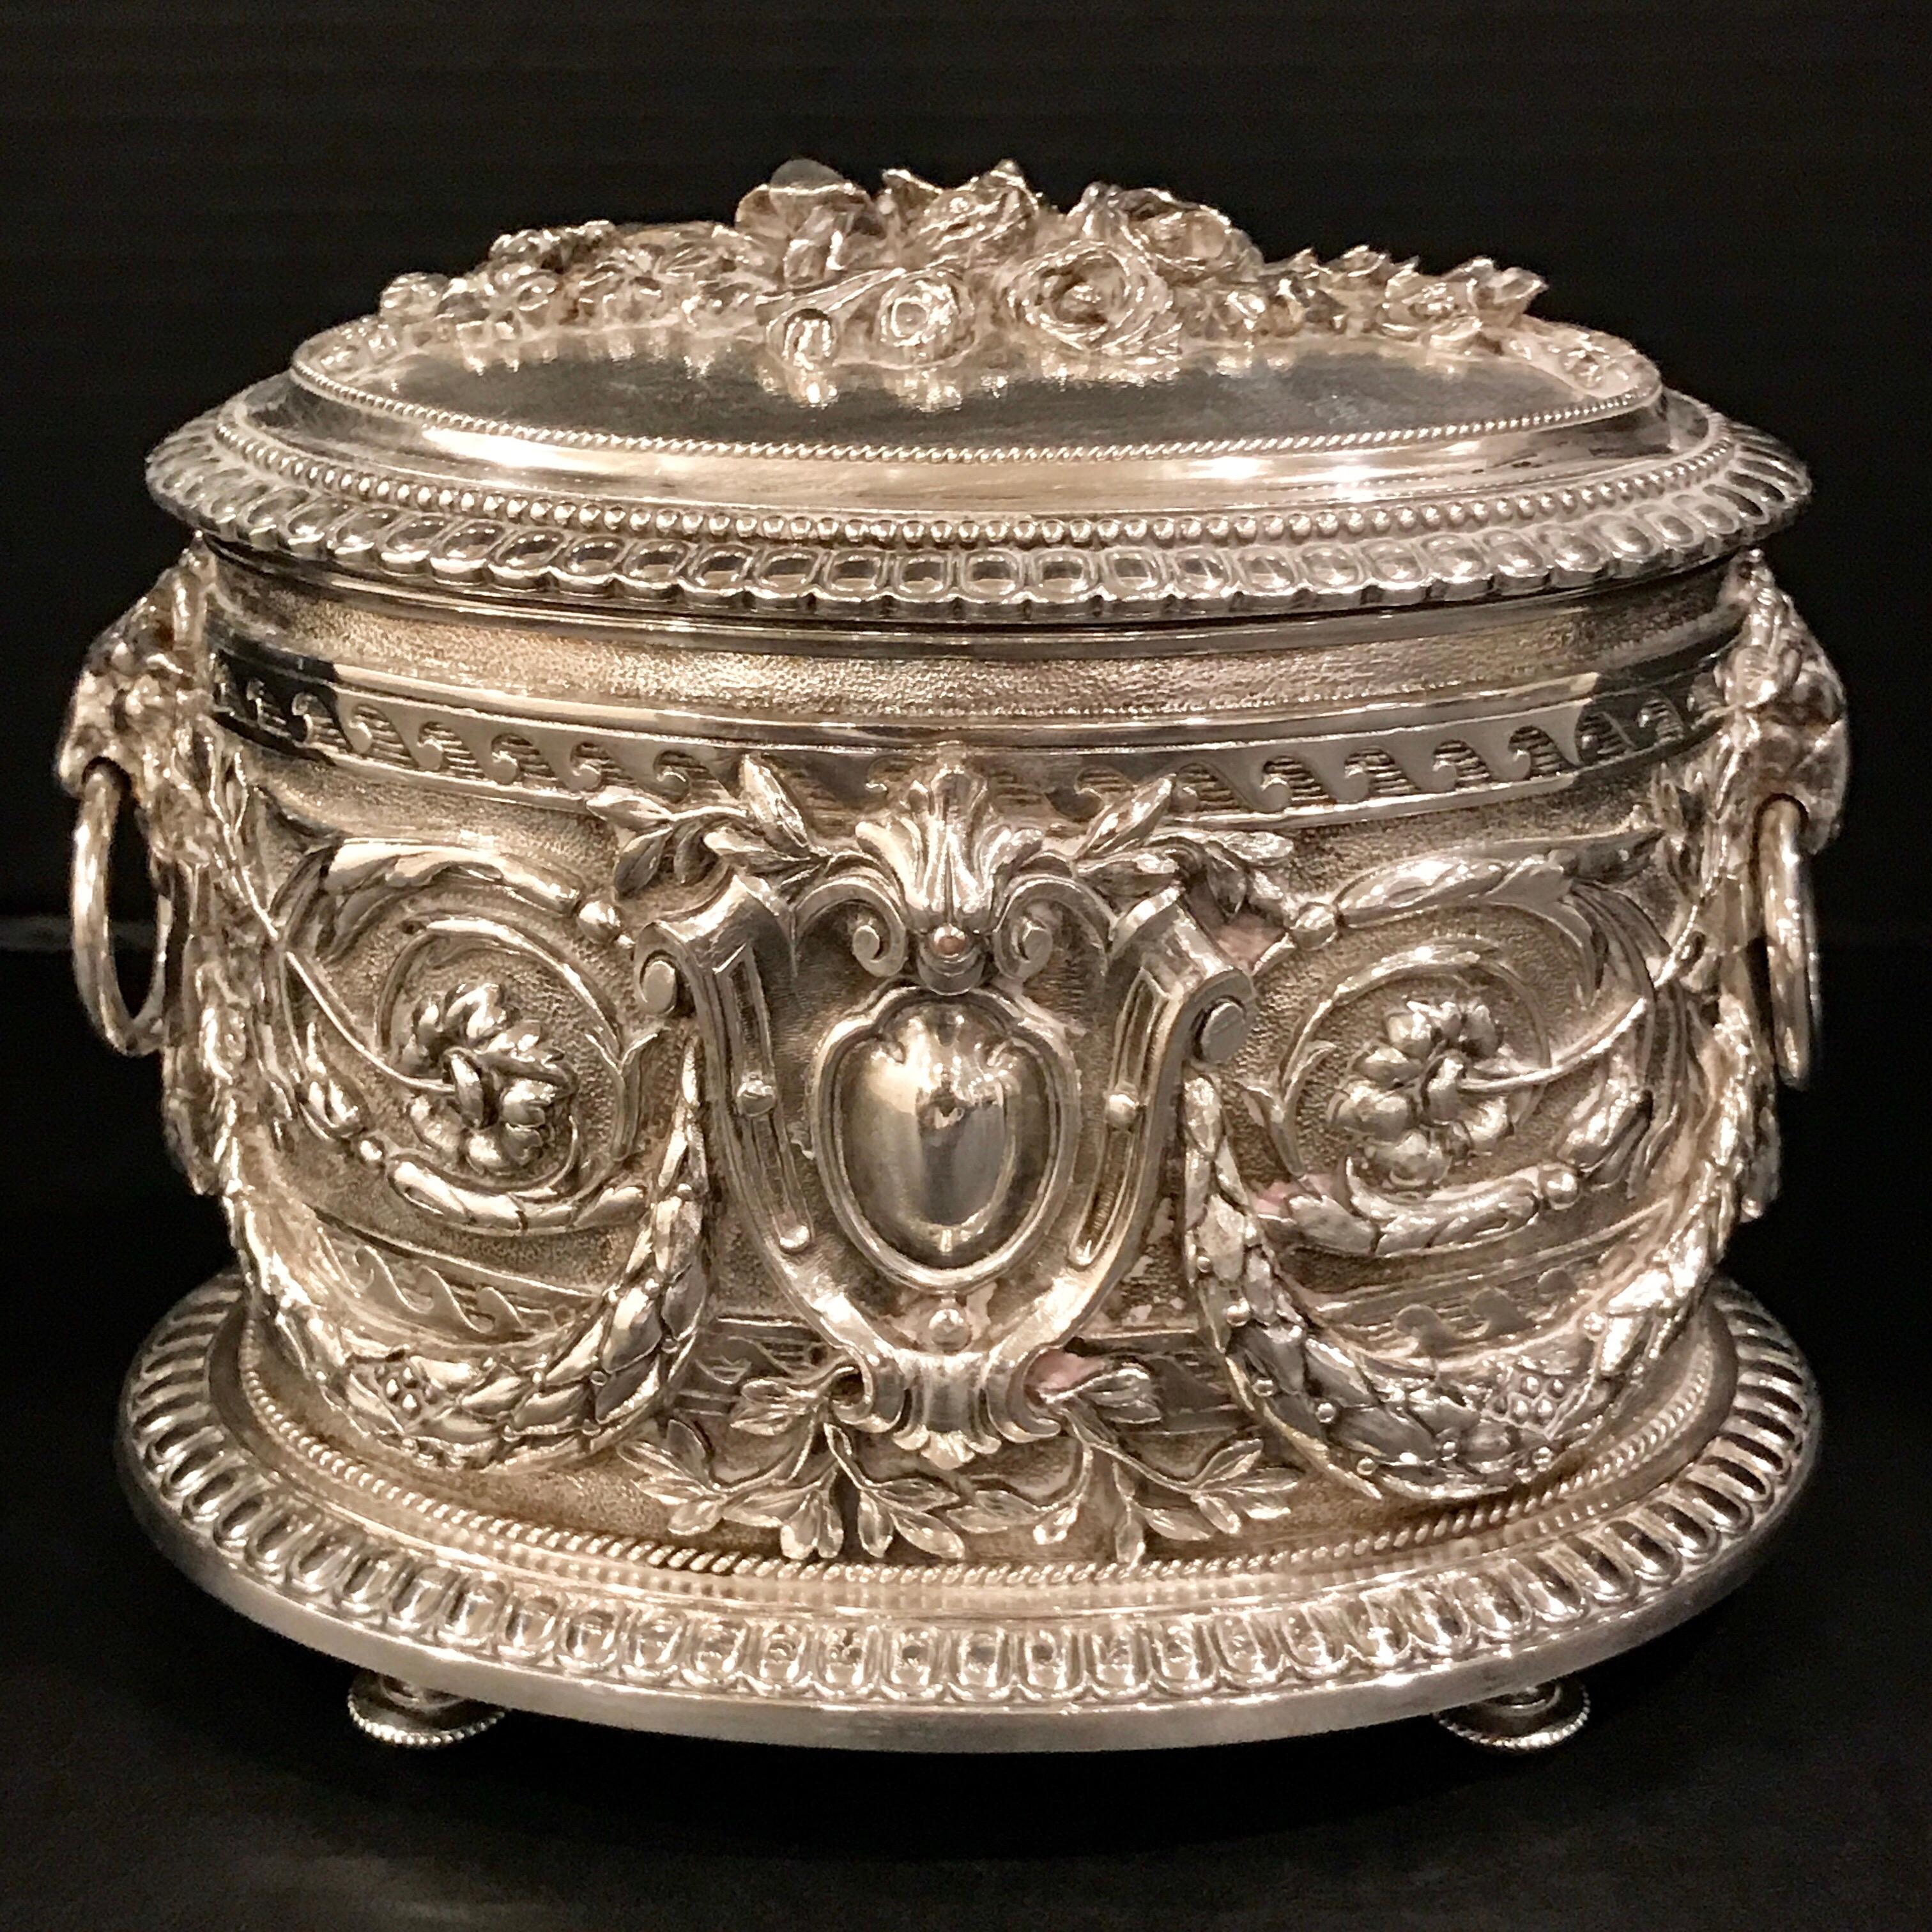 A spectacular repoused oval table box with lion handles, maker's marks for Hukin and Heath, Birmingham.
Measures: 4” interior depth x 5